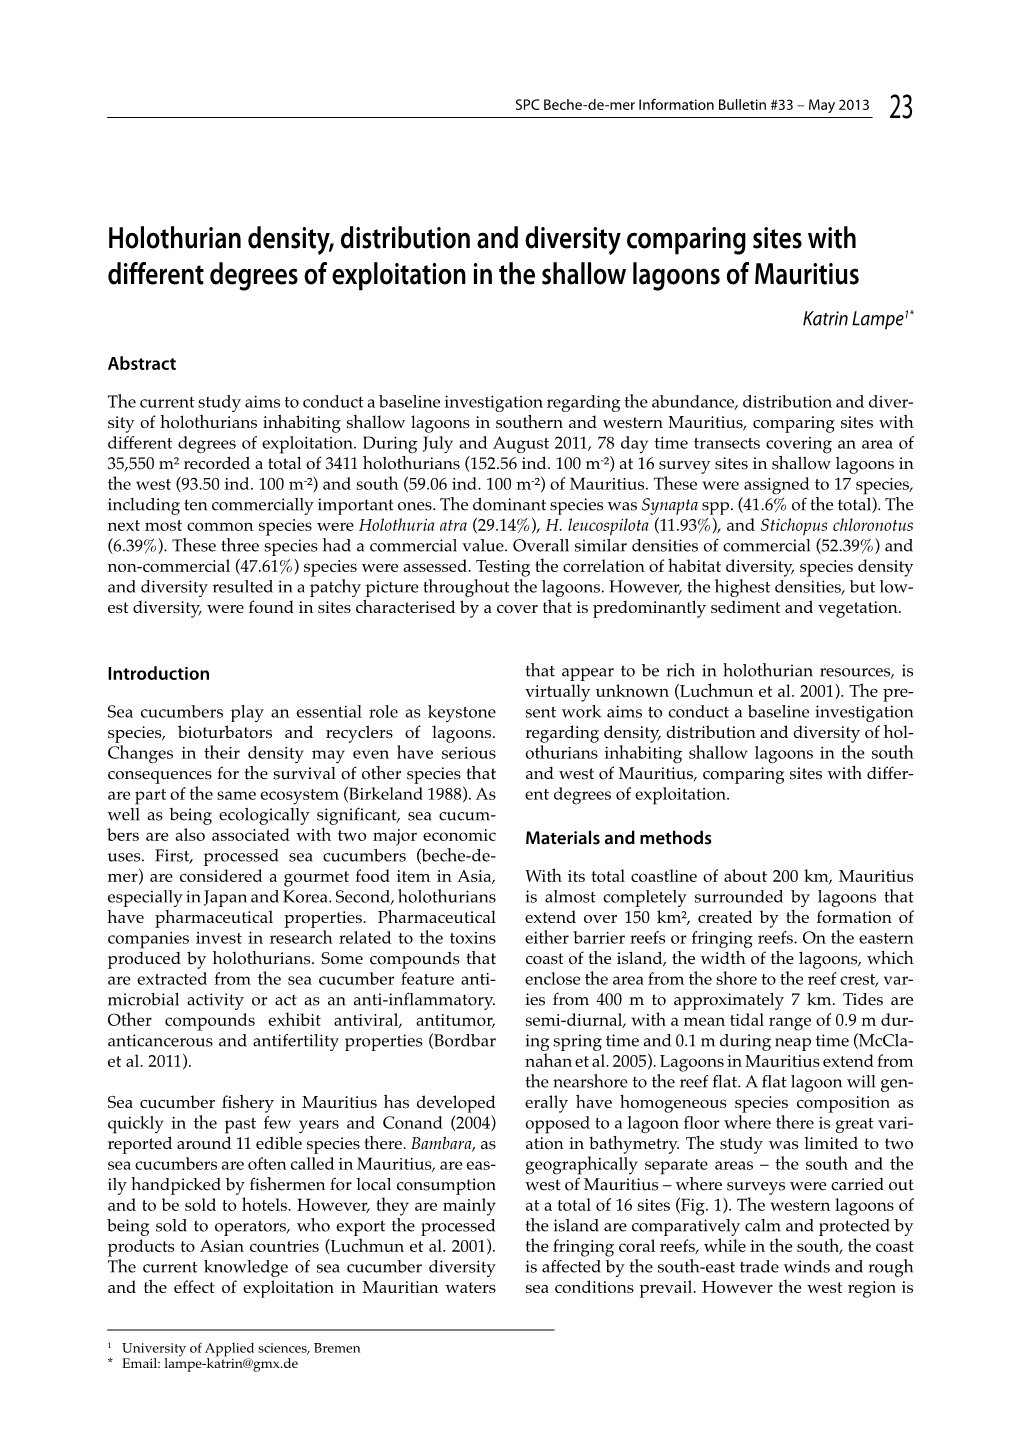 Holothurian Density, Distribution and Diversity Comparing Sites with Different Degrees of Exploitation in the Shallow Lagoons of Mauritius Katrin Lampe1*